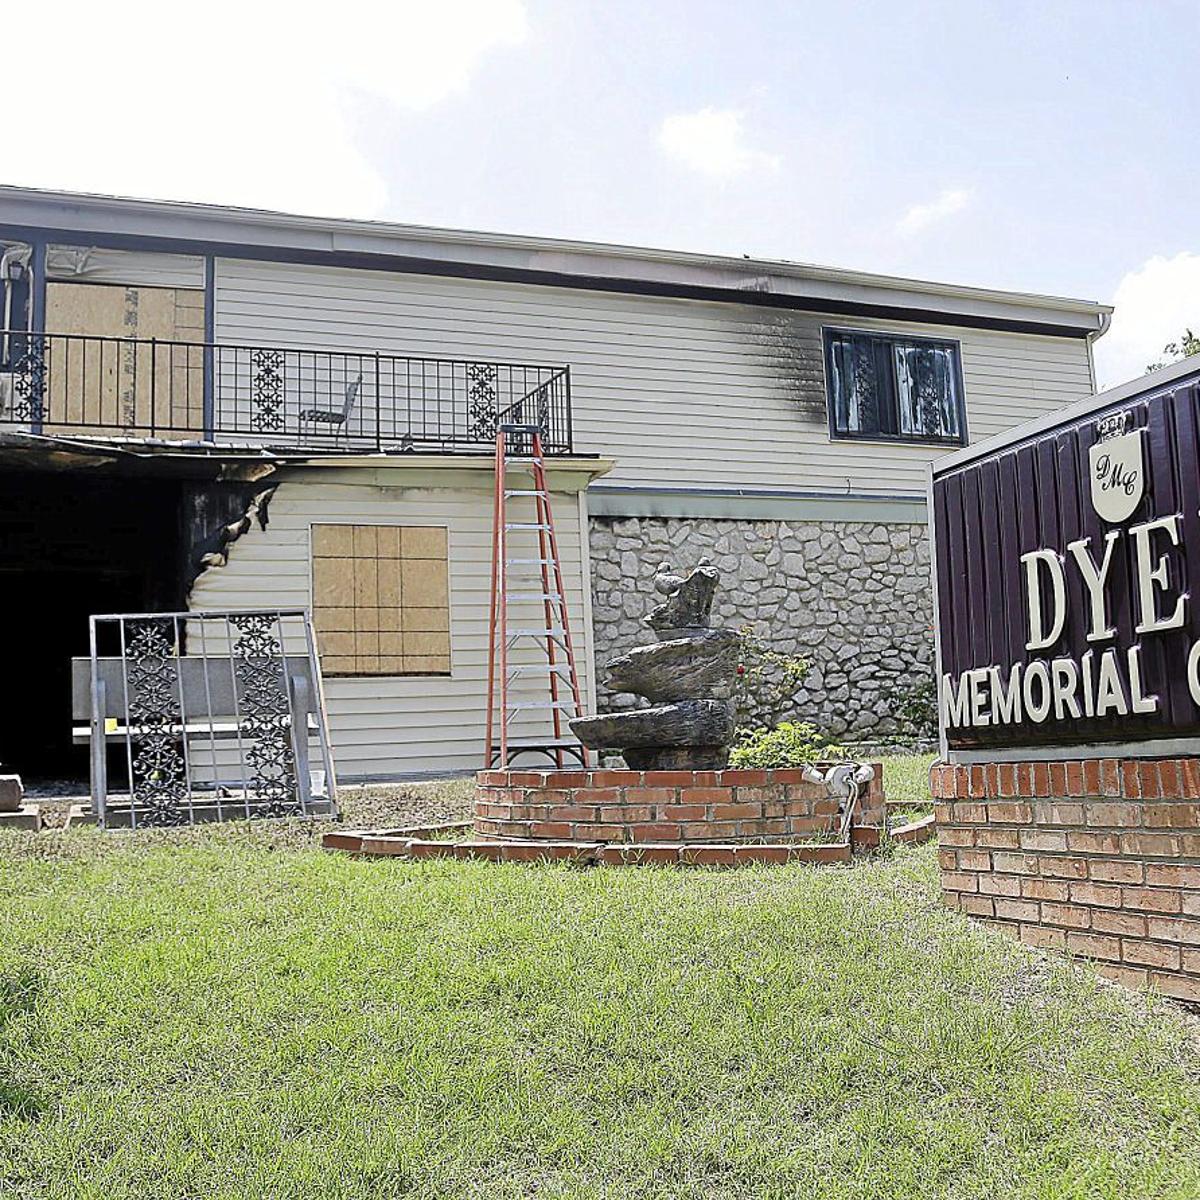 North Tulsa Funeral Home That Burned In 2015 Merges With Butler Stumpff Archive Tulsaworld Com